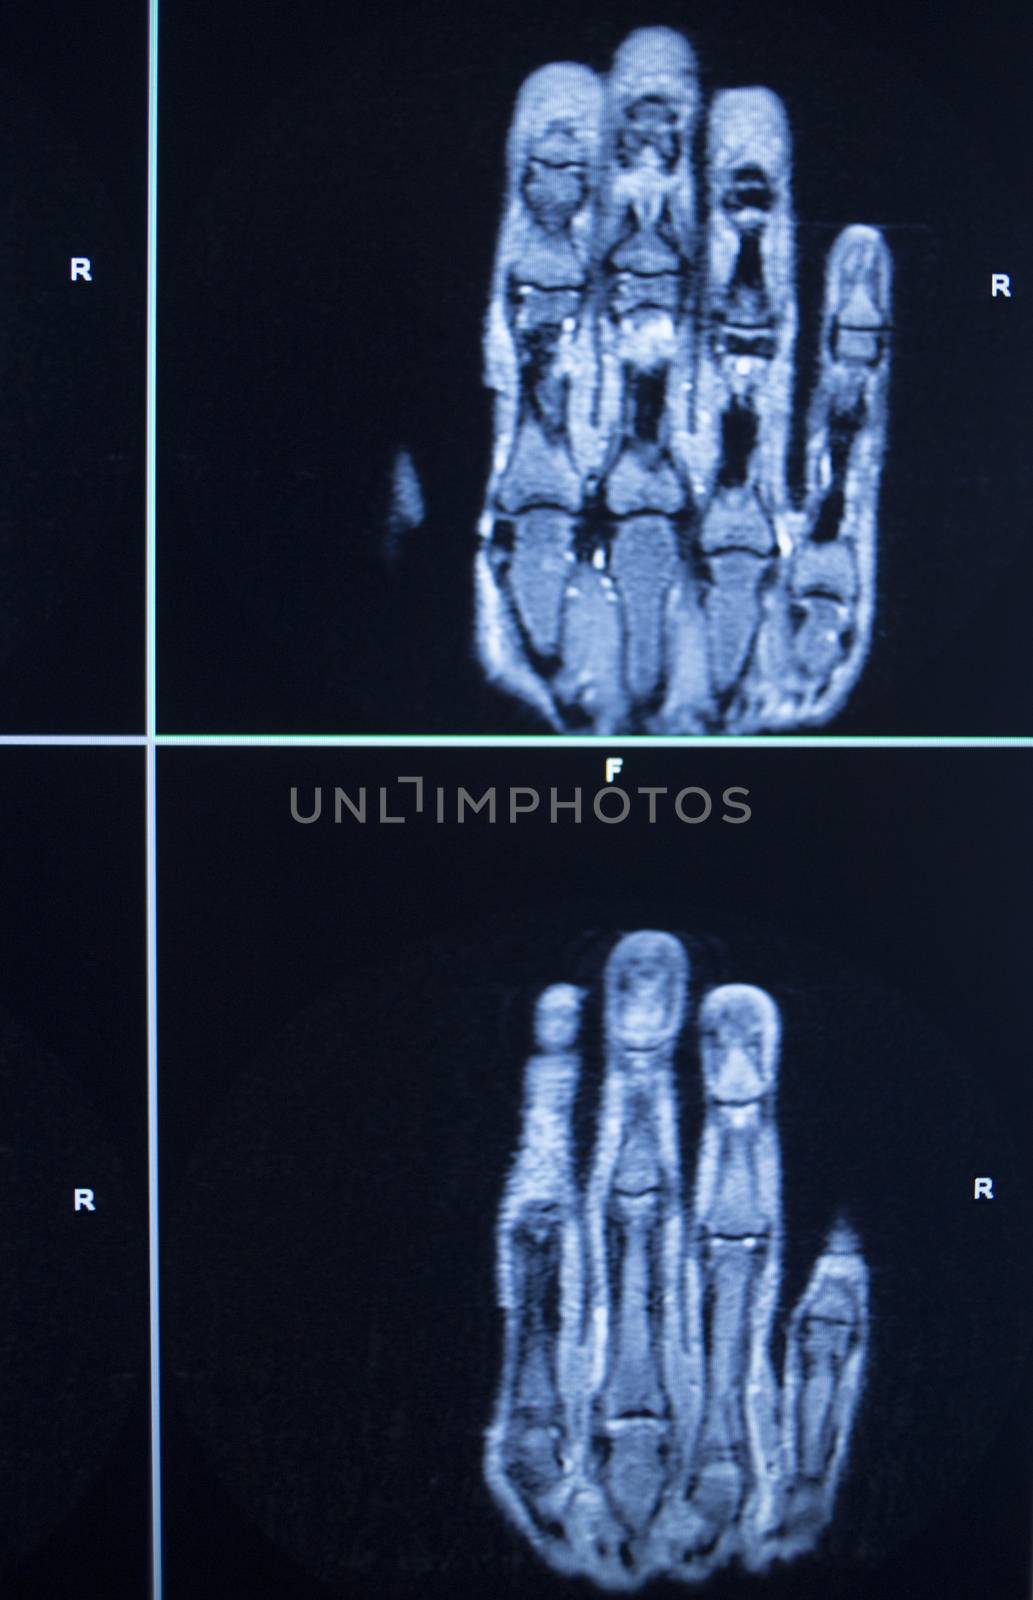 MRI magentic resonance imaging nuclear scanning scan test results hand fingers injury photo.